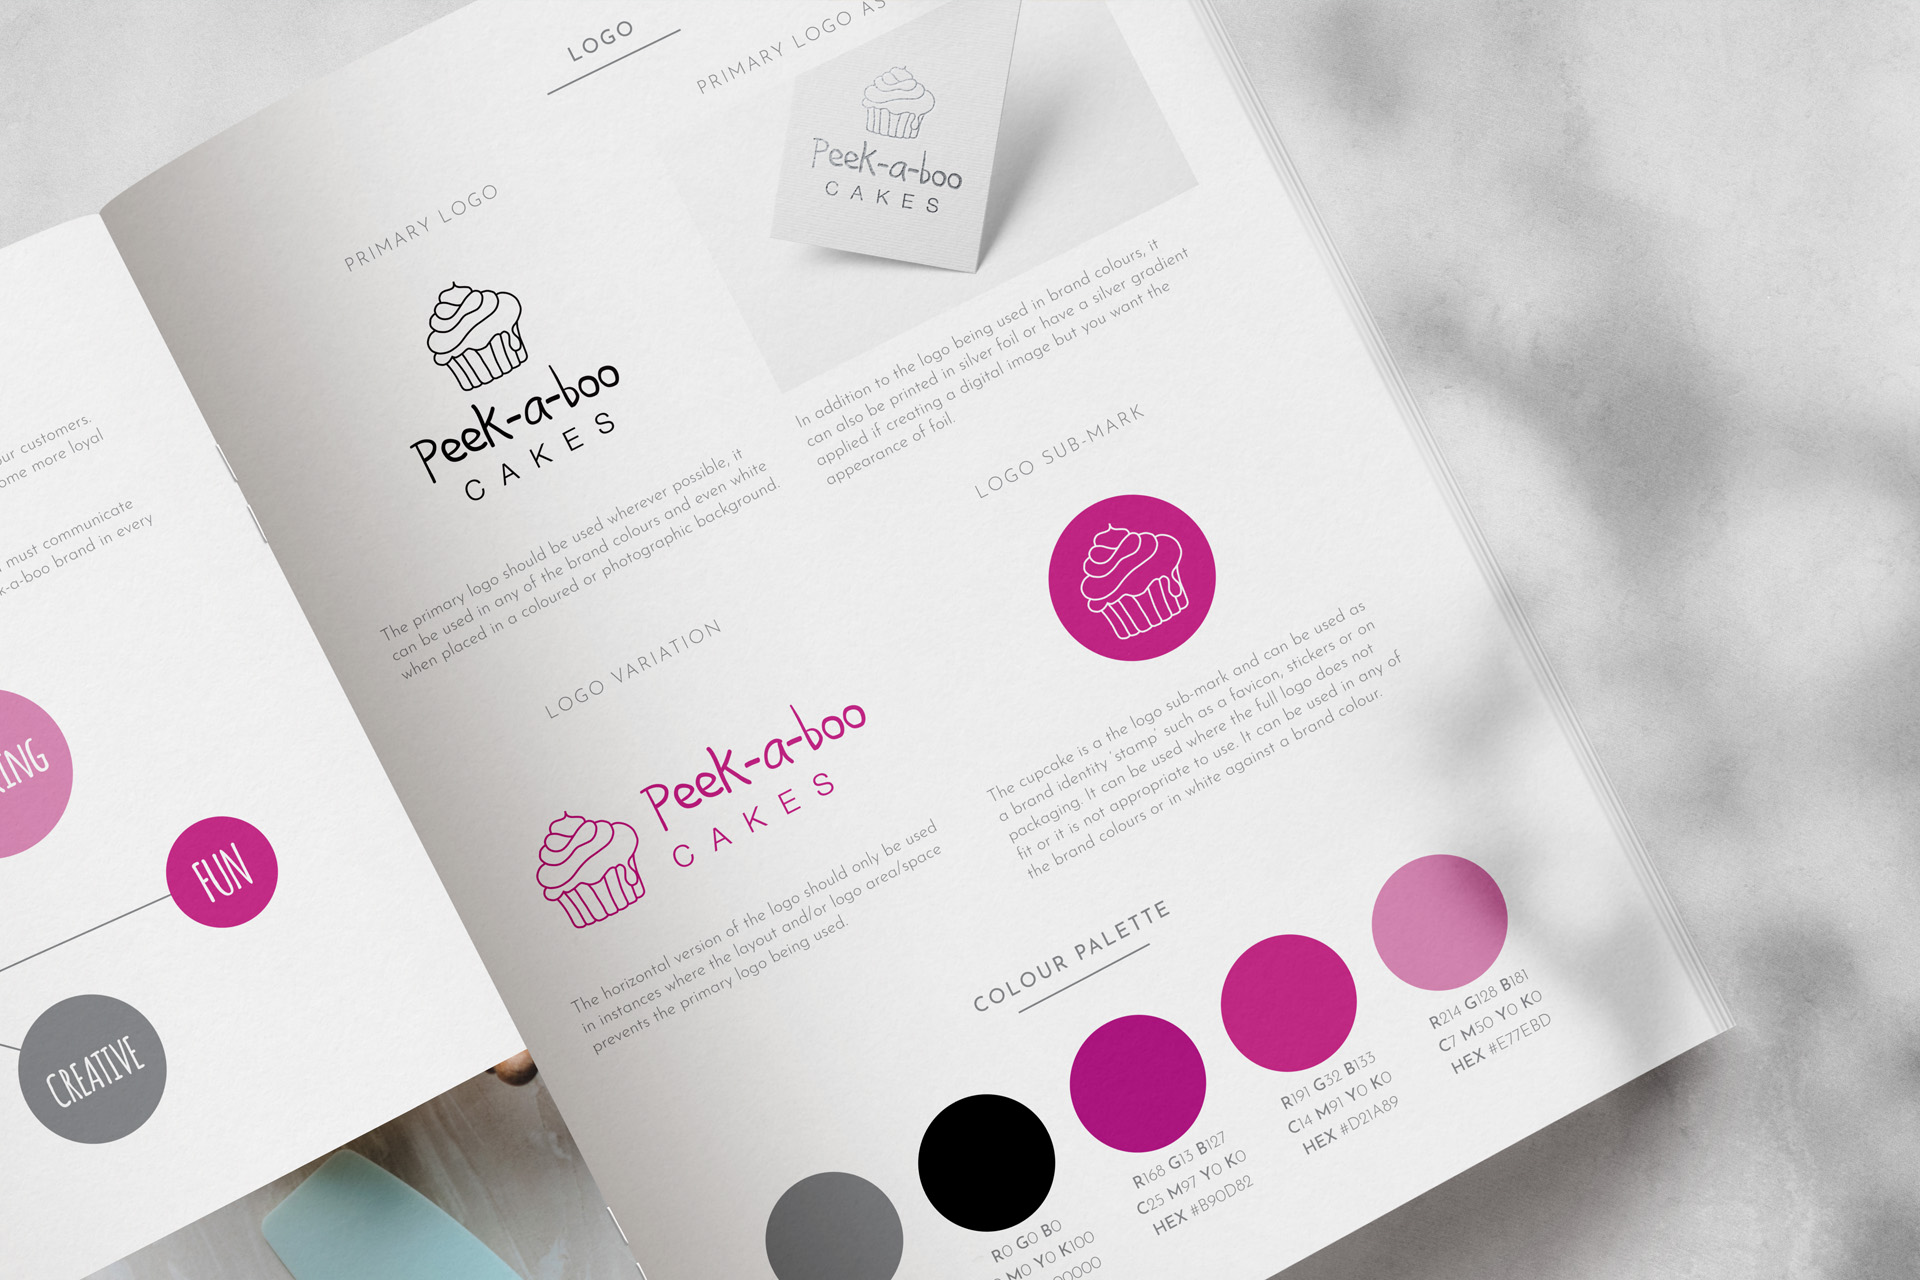 Peek-a-boo cakes brand guidelines